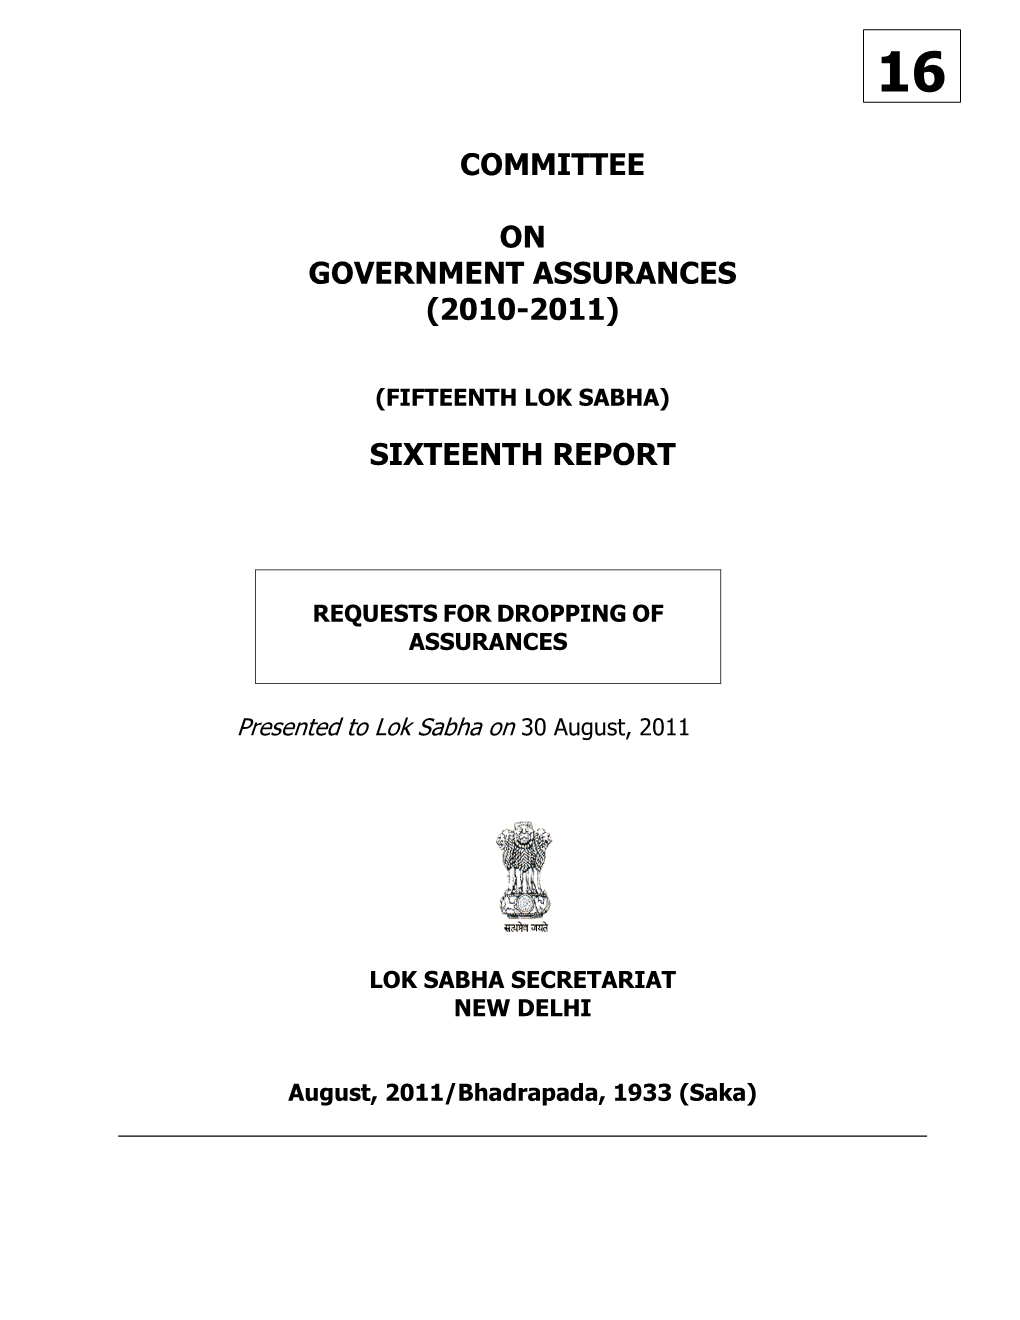 Committee on Government Assurances* (2010 - 2011)